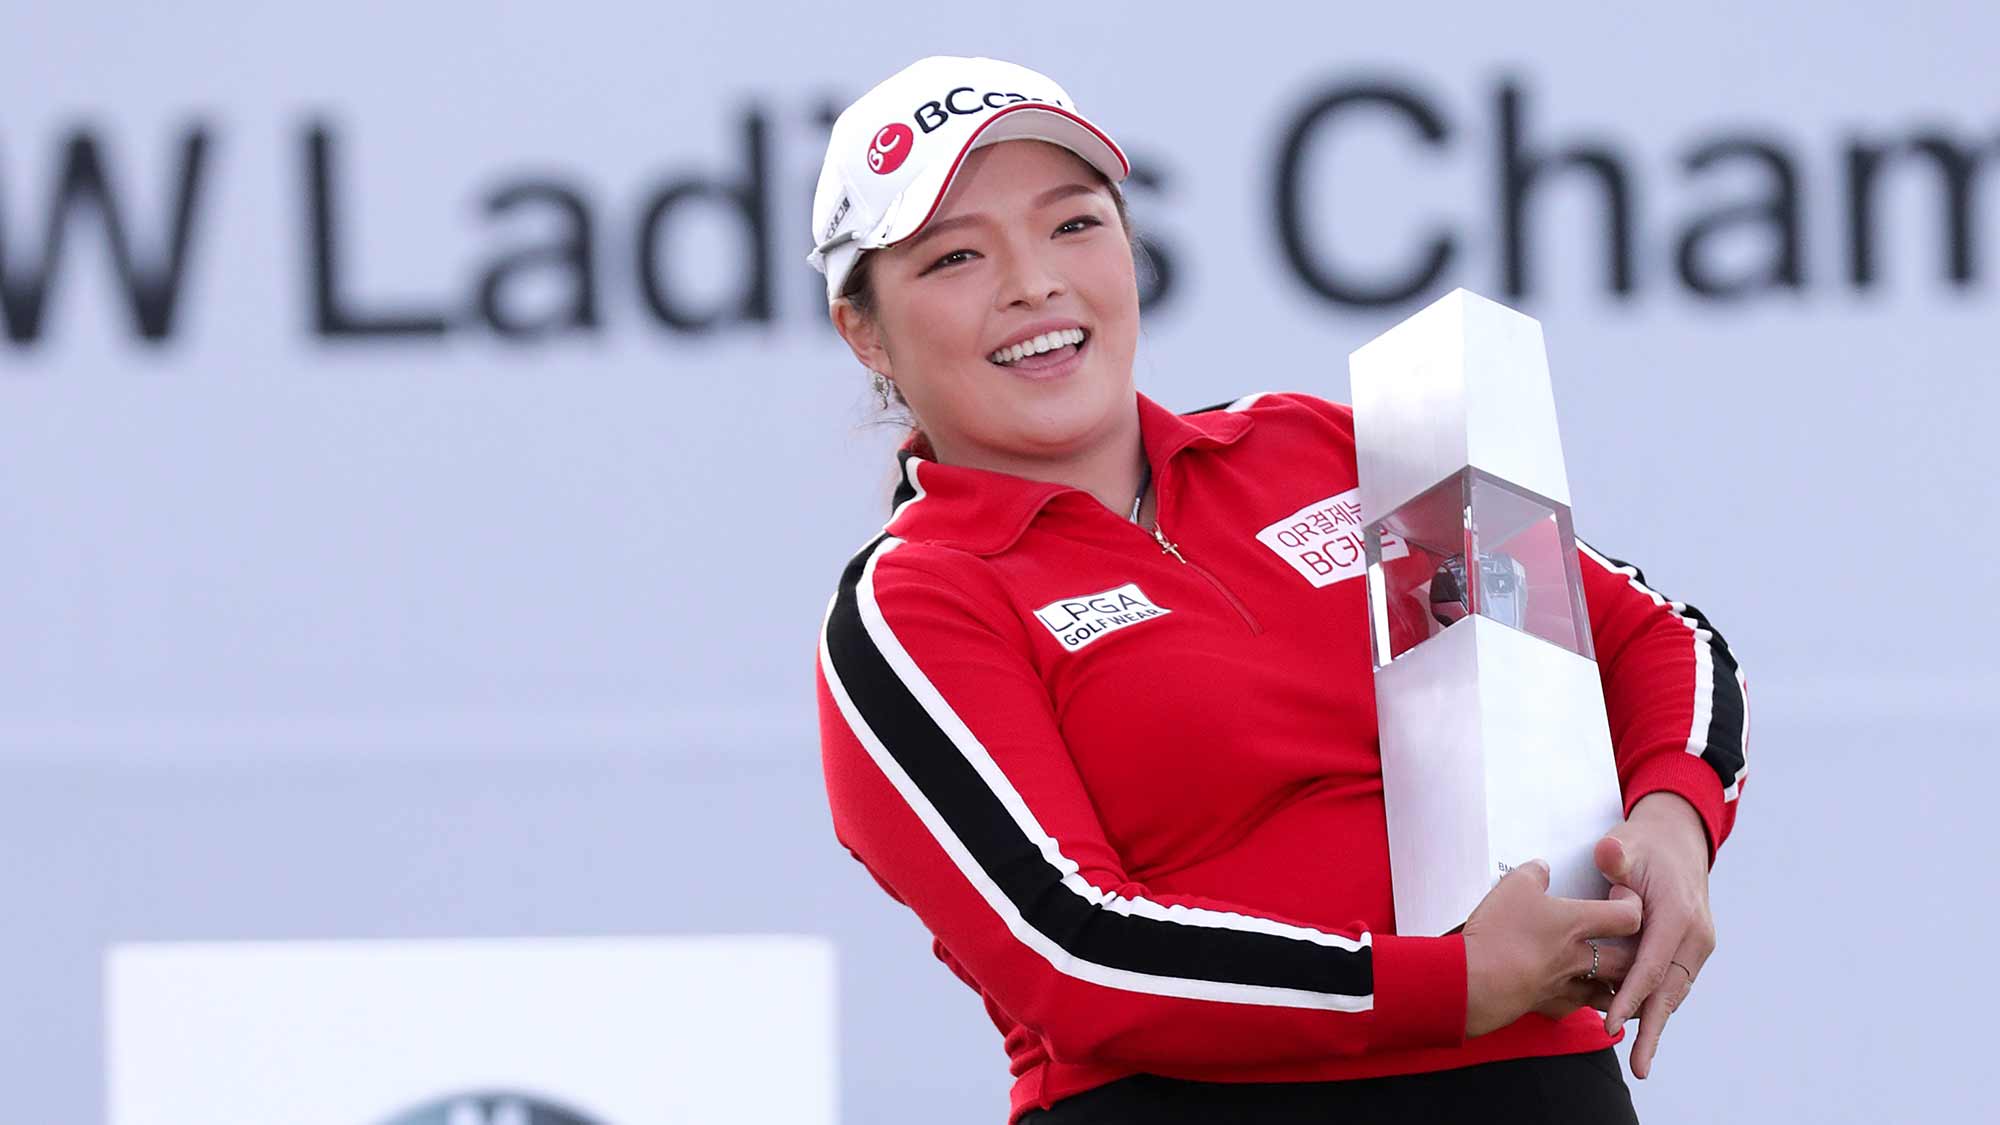 Ha Na Jang of the Republic of Korea poses for media as she with the trophy after winning the final Round of 2019 BMW Ladies Championship at LPGA International Busan on October 27, 2019 in Busan, Republic of Korea